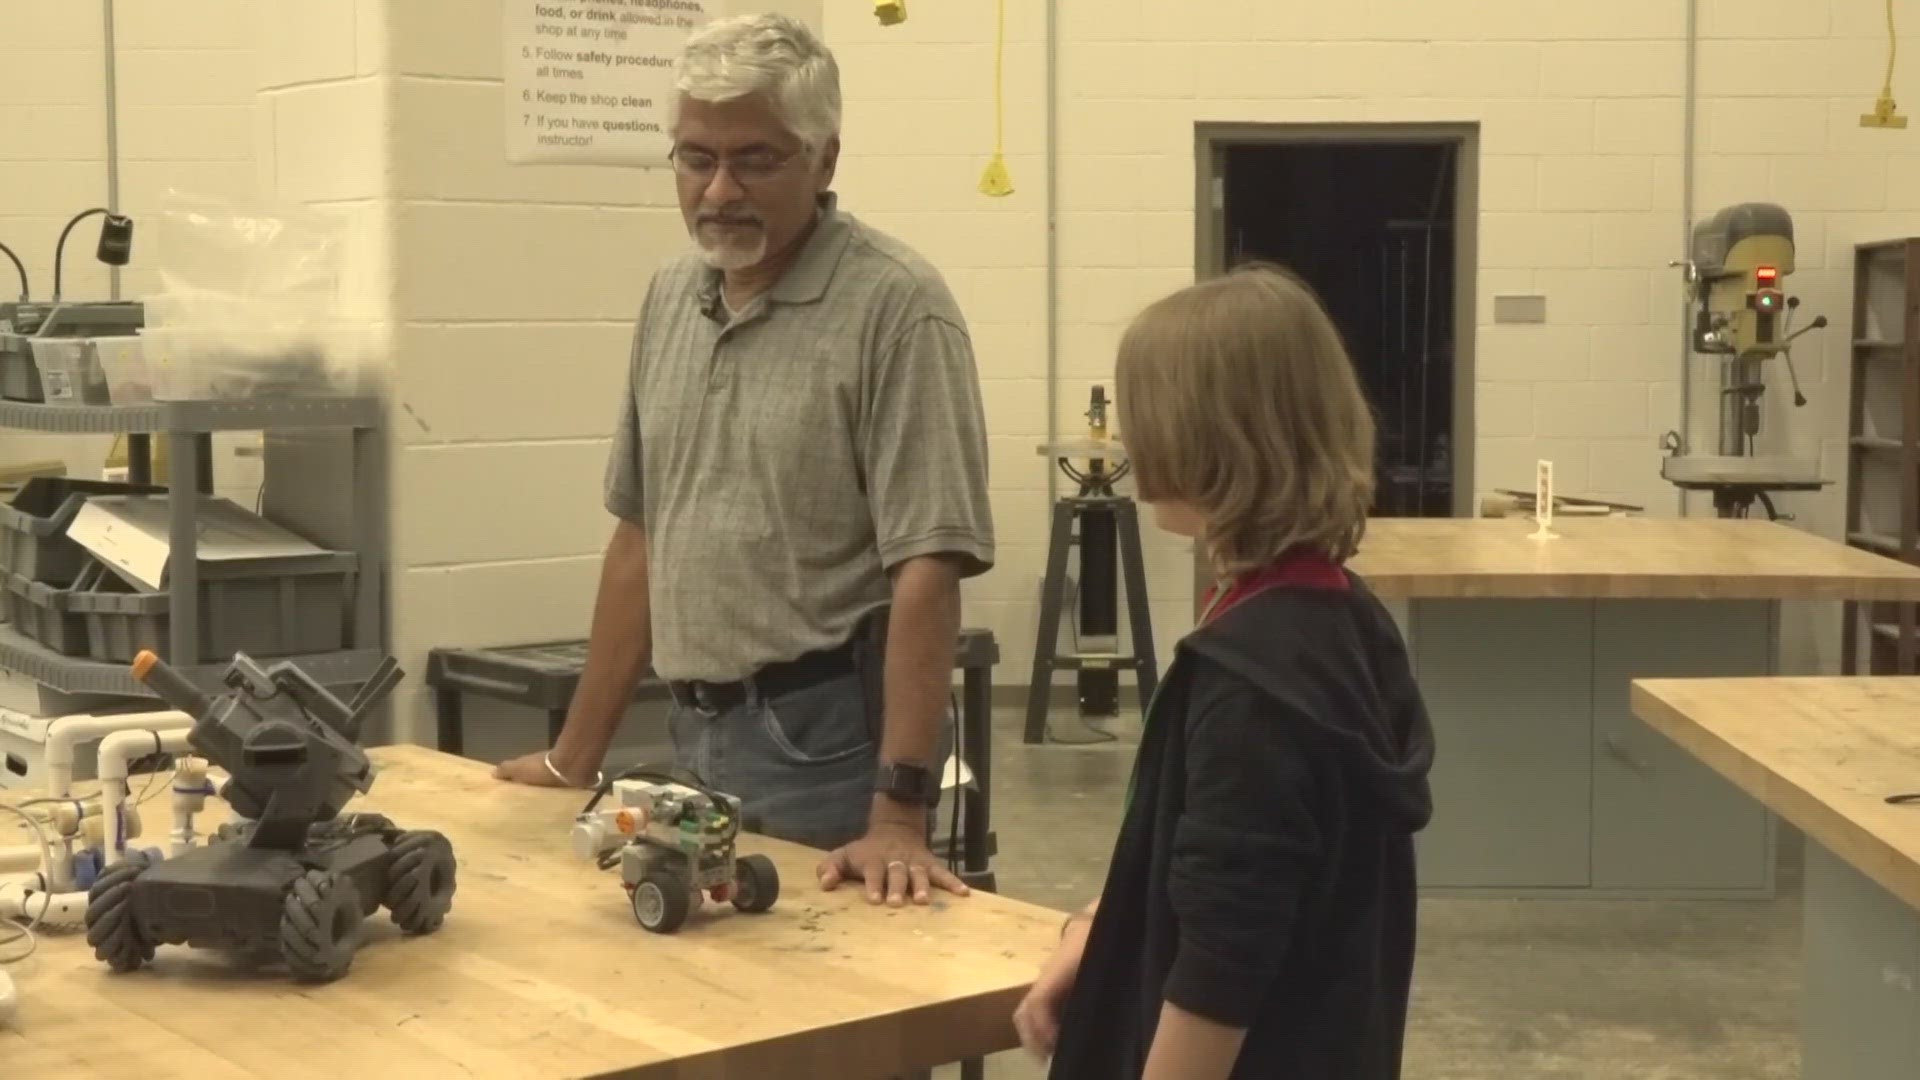 Naveen Cunha is an 8th grade robotics teacher at Stephen F. Austin Middle School in Bryan, and says he's honored to be representing the district in his way.